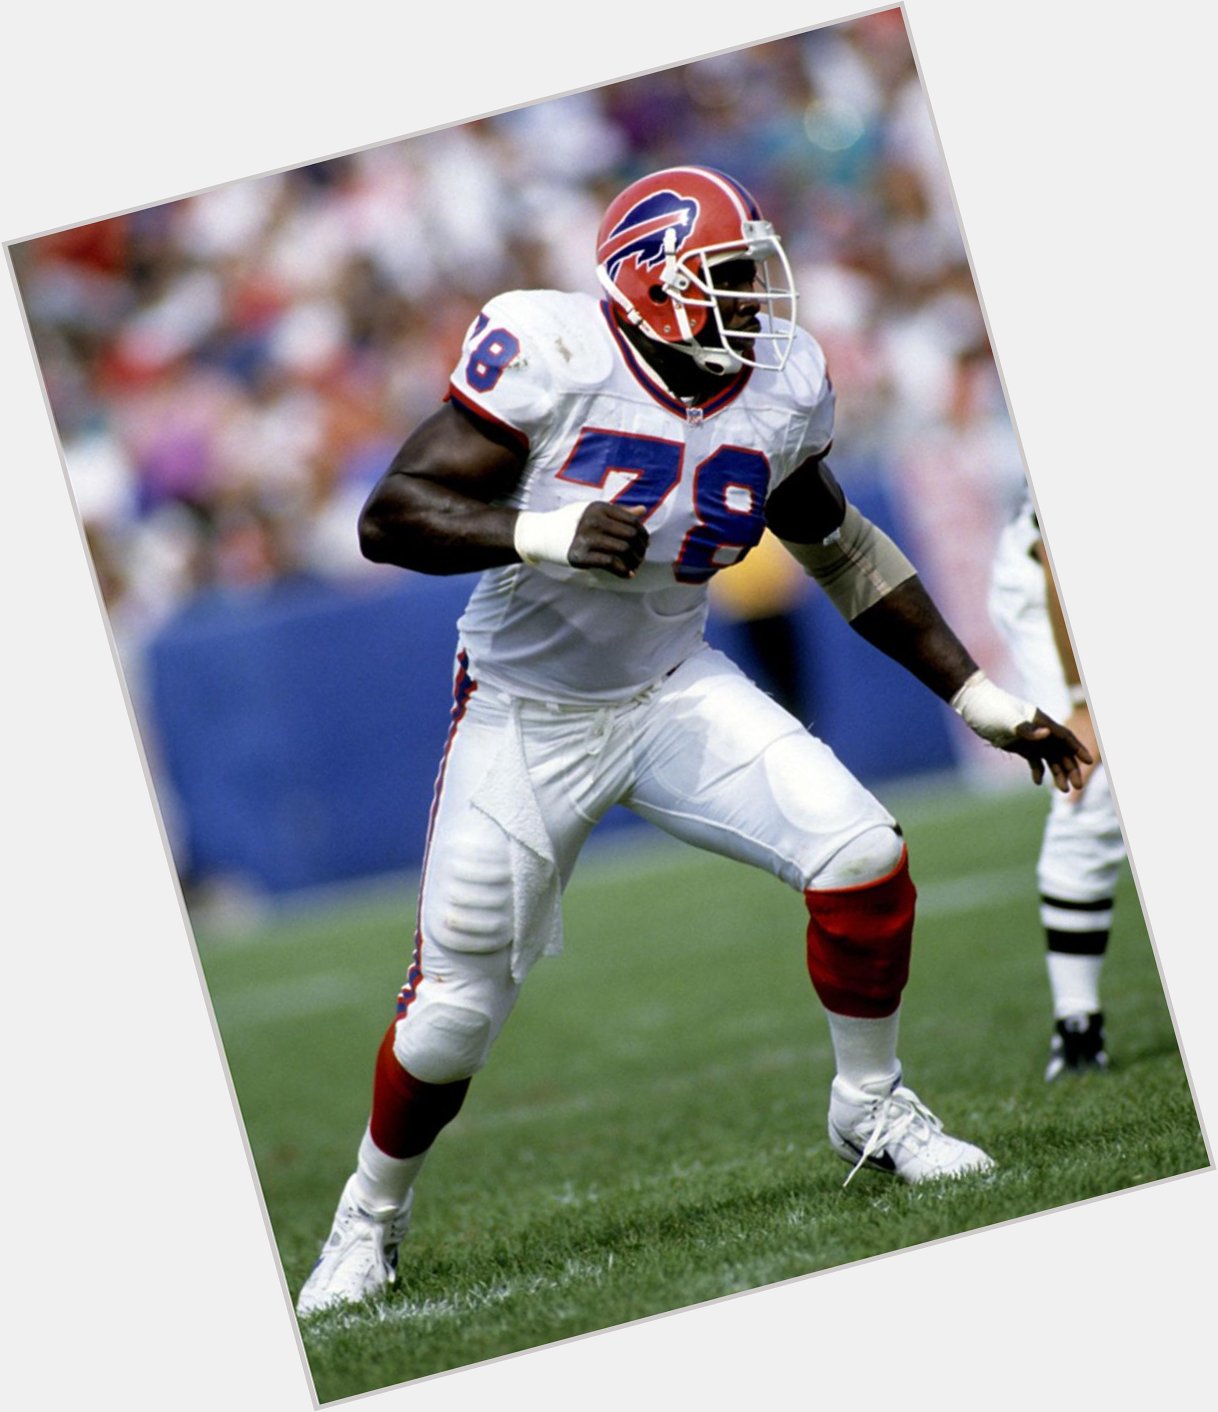 Happy Birthday to Bruce Smith, who turns 52 today! 